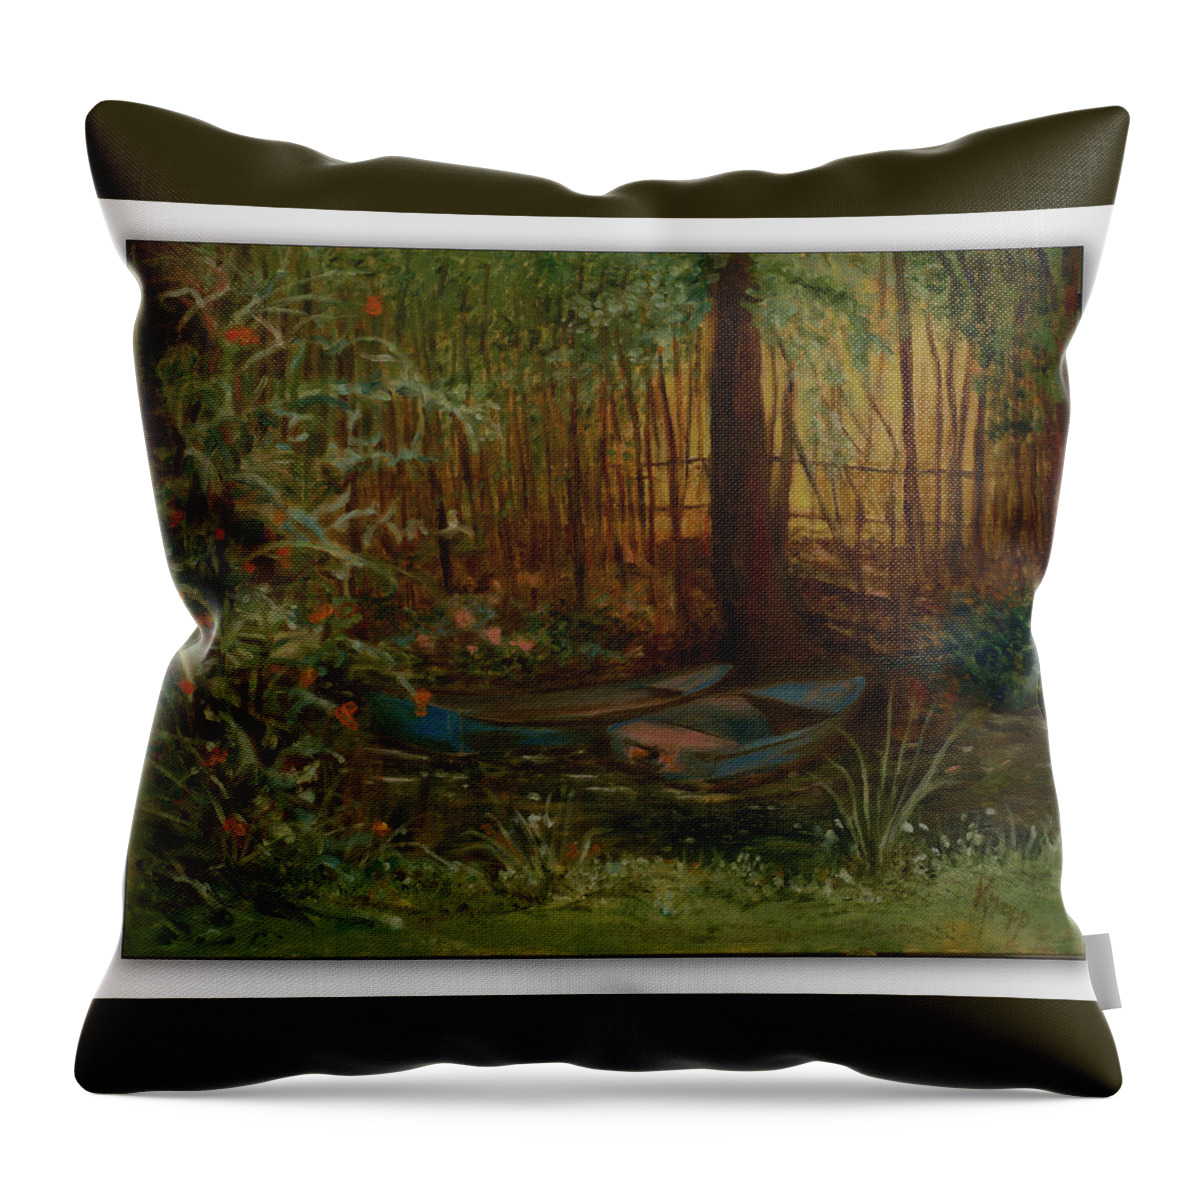  Oil On Canvas Throw Pillow featuring the painting On Monet's Pond by Kathy Knopp